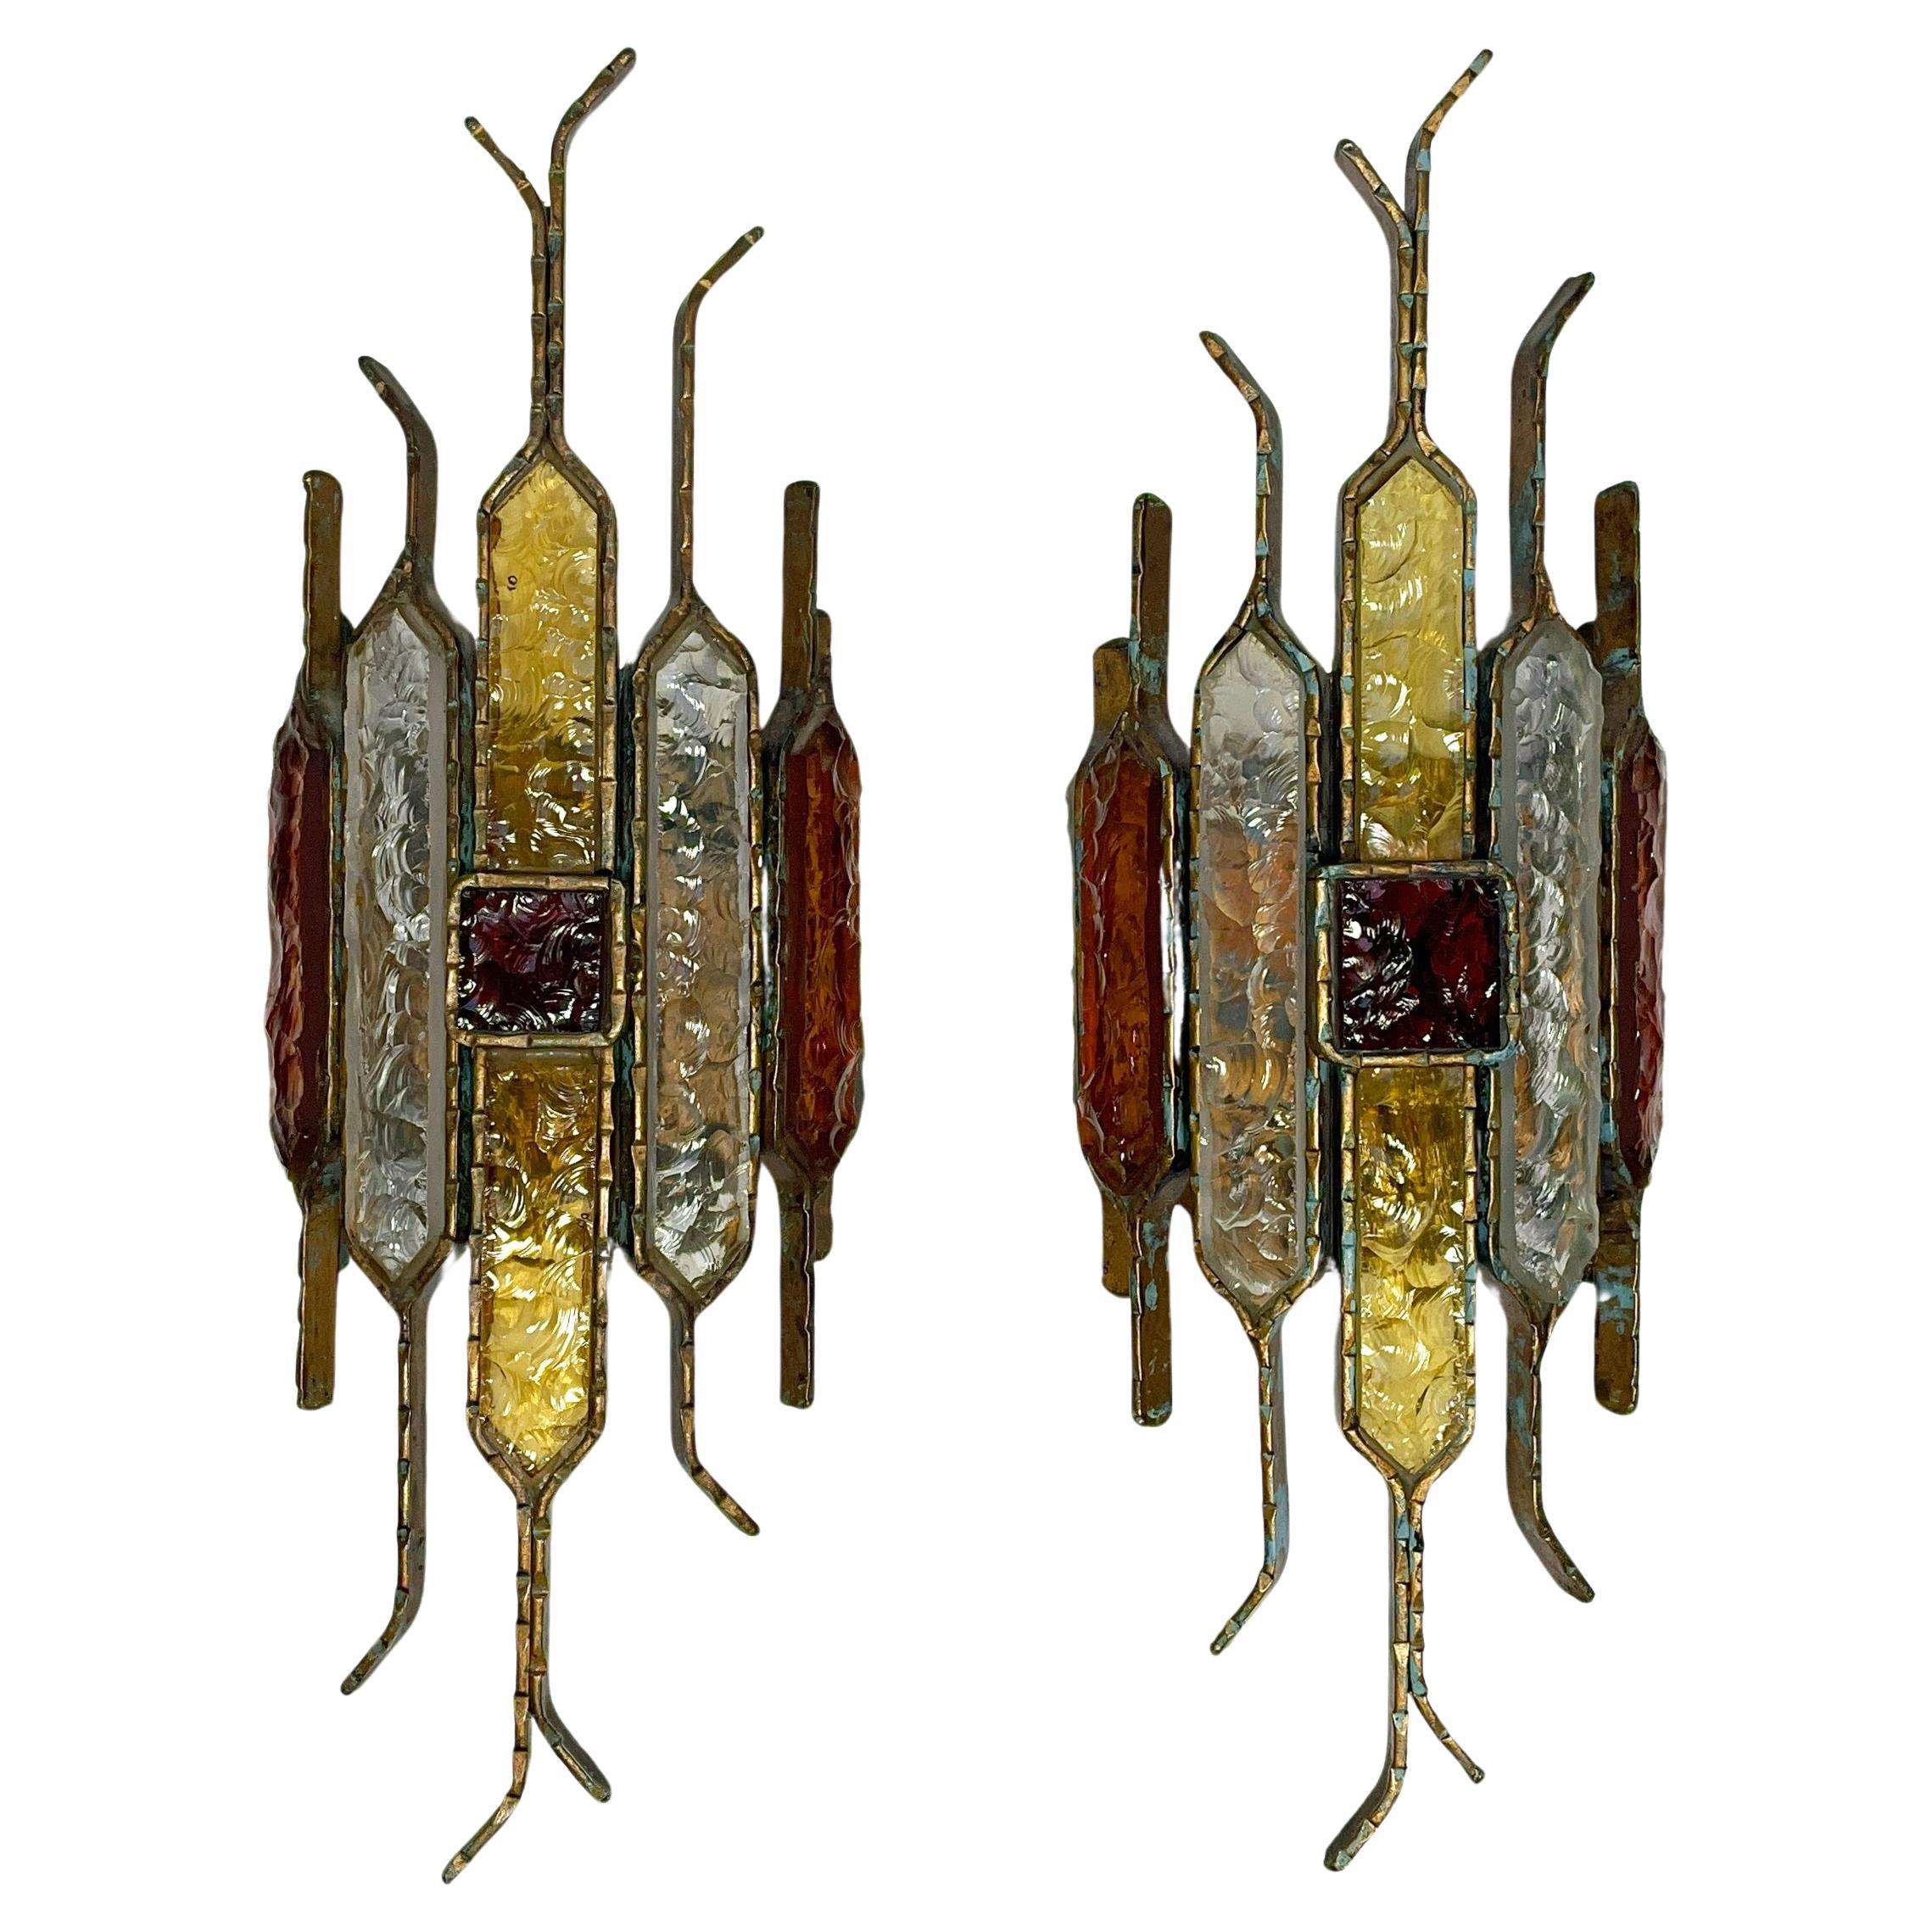 Very beautiful, colourful & stunning pair of wall lamps by the italian manufacturer Longobard. 
The sconces are made different coloured, hammered Murano glass elements and wrought iron with gilding gold copper patina.
There is a slight differences